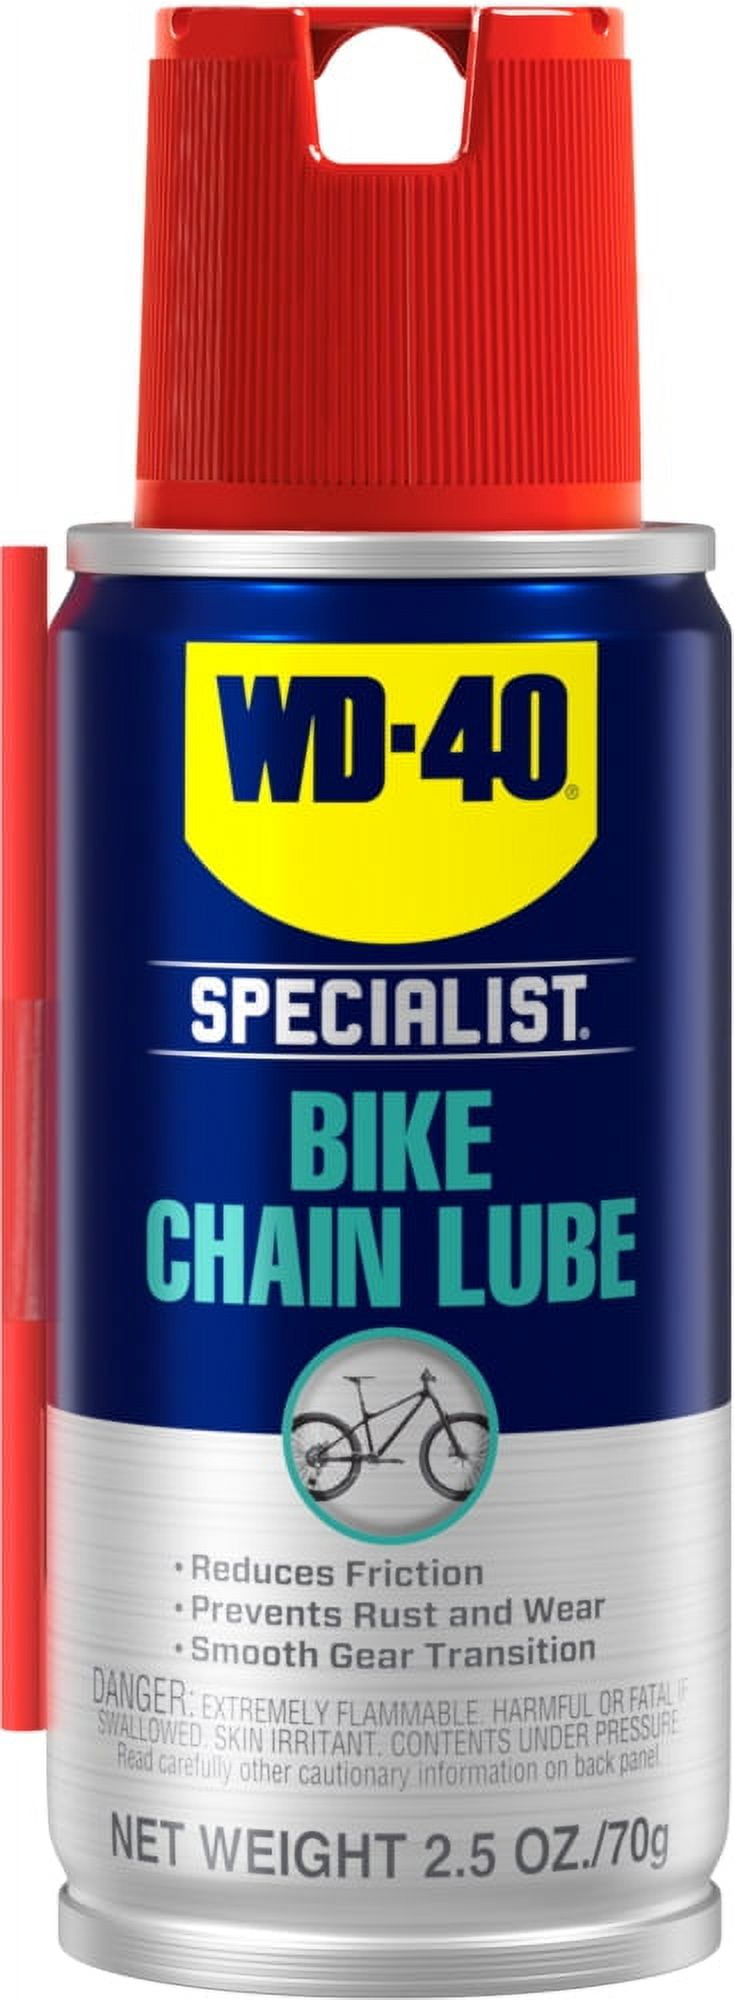 Cleanest chain lube? : r/Dualsport